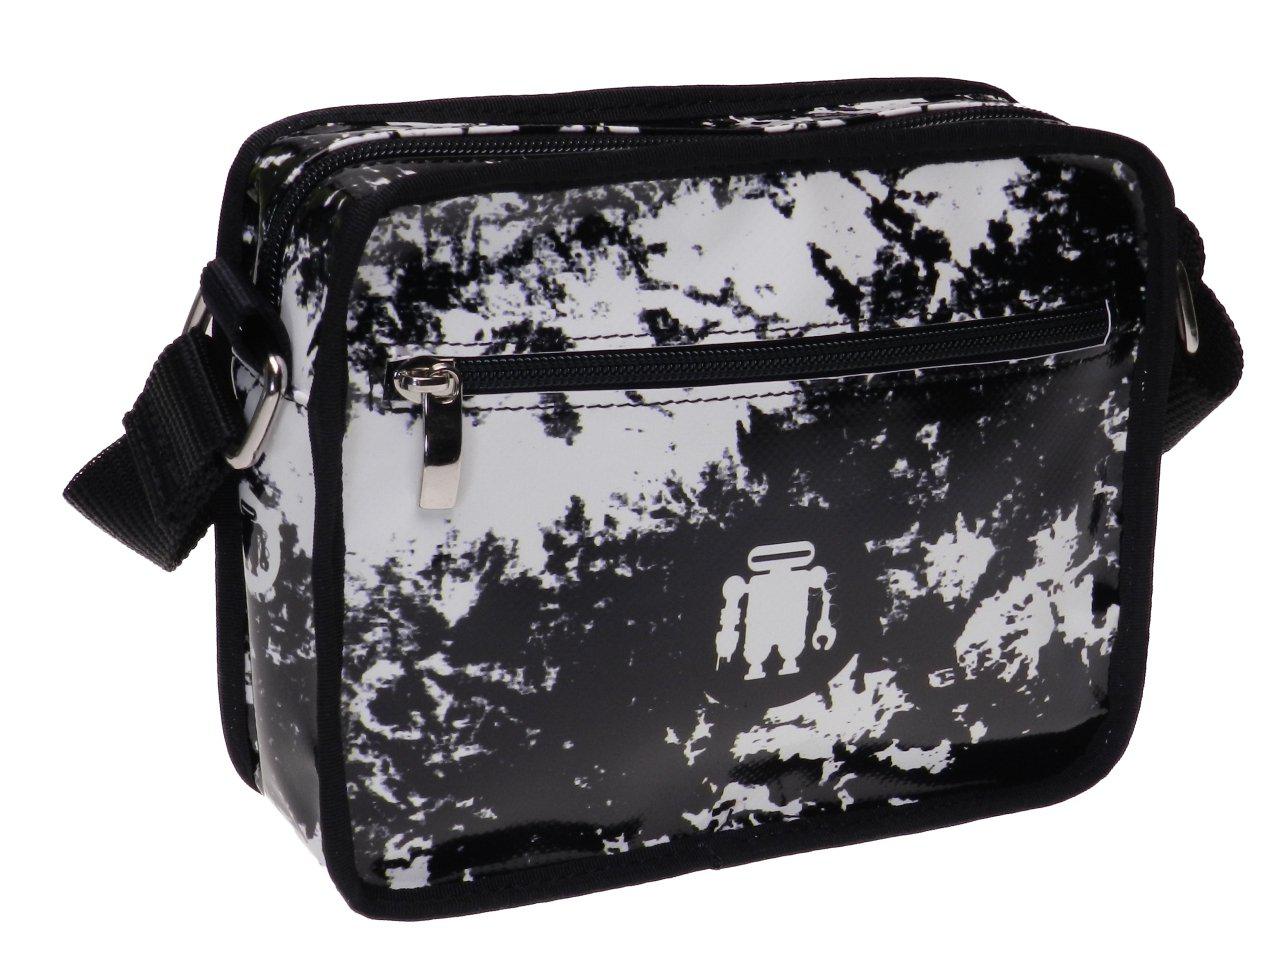 SMALL CROSSBODY BAG BLACK AND WHITE WITH TIE DYE FANTASY. MODEL FRIK MADE OF LORRY TARPAULIN. - Limited Edition Paul Meccanico